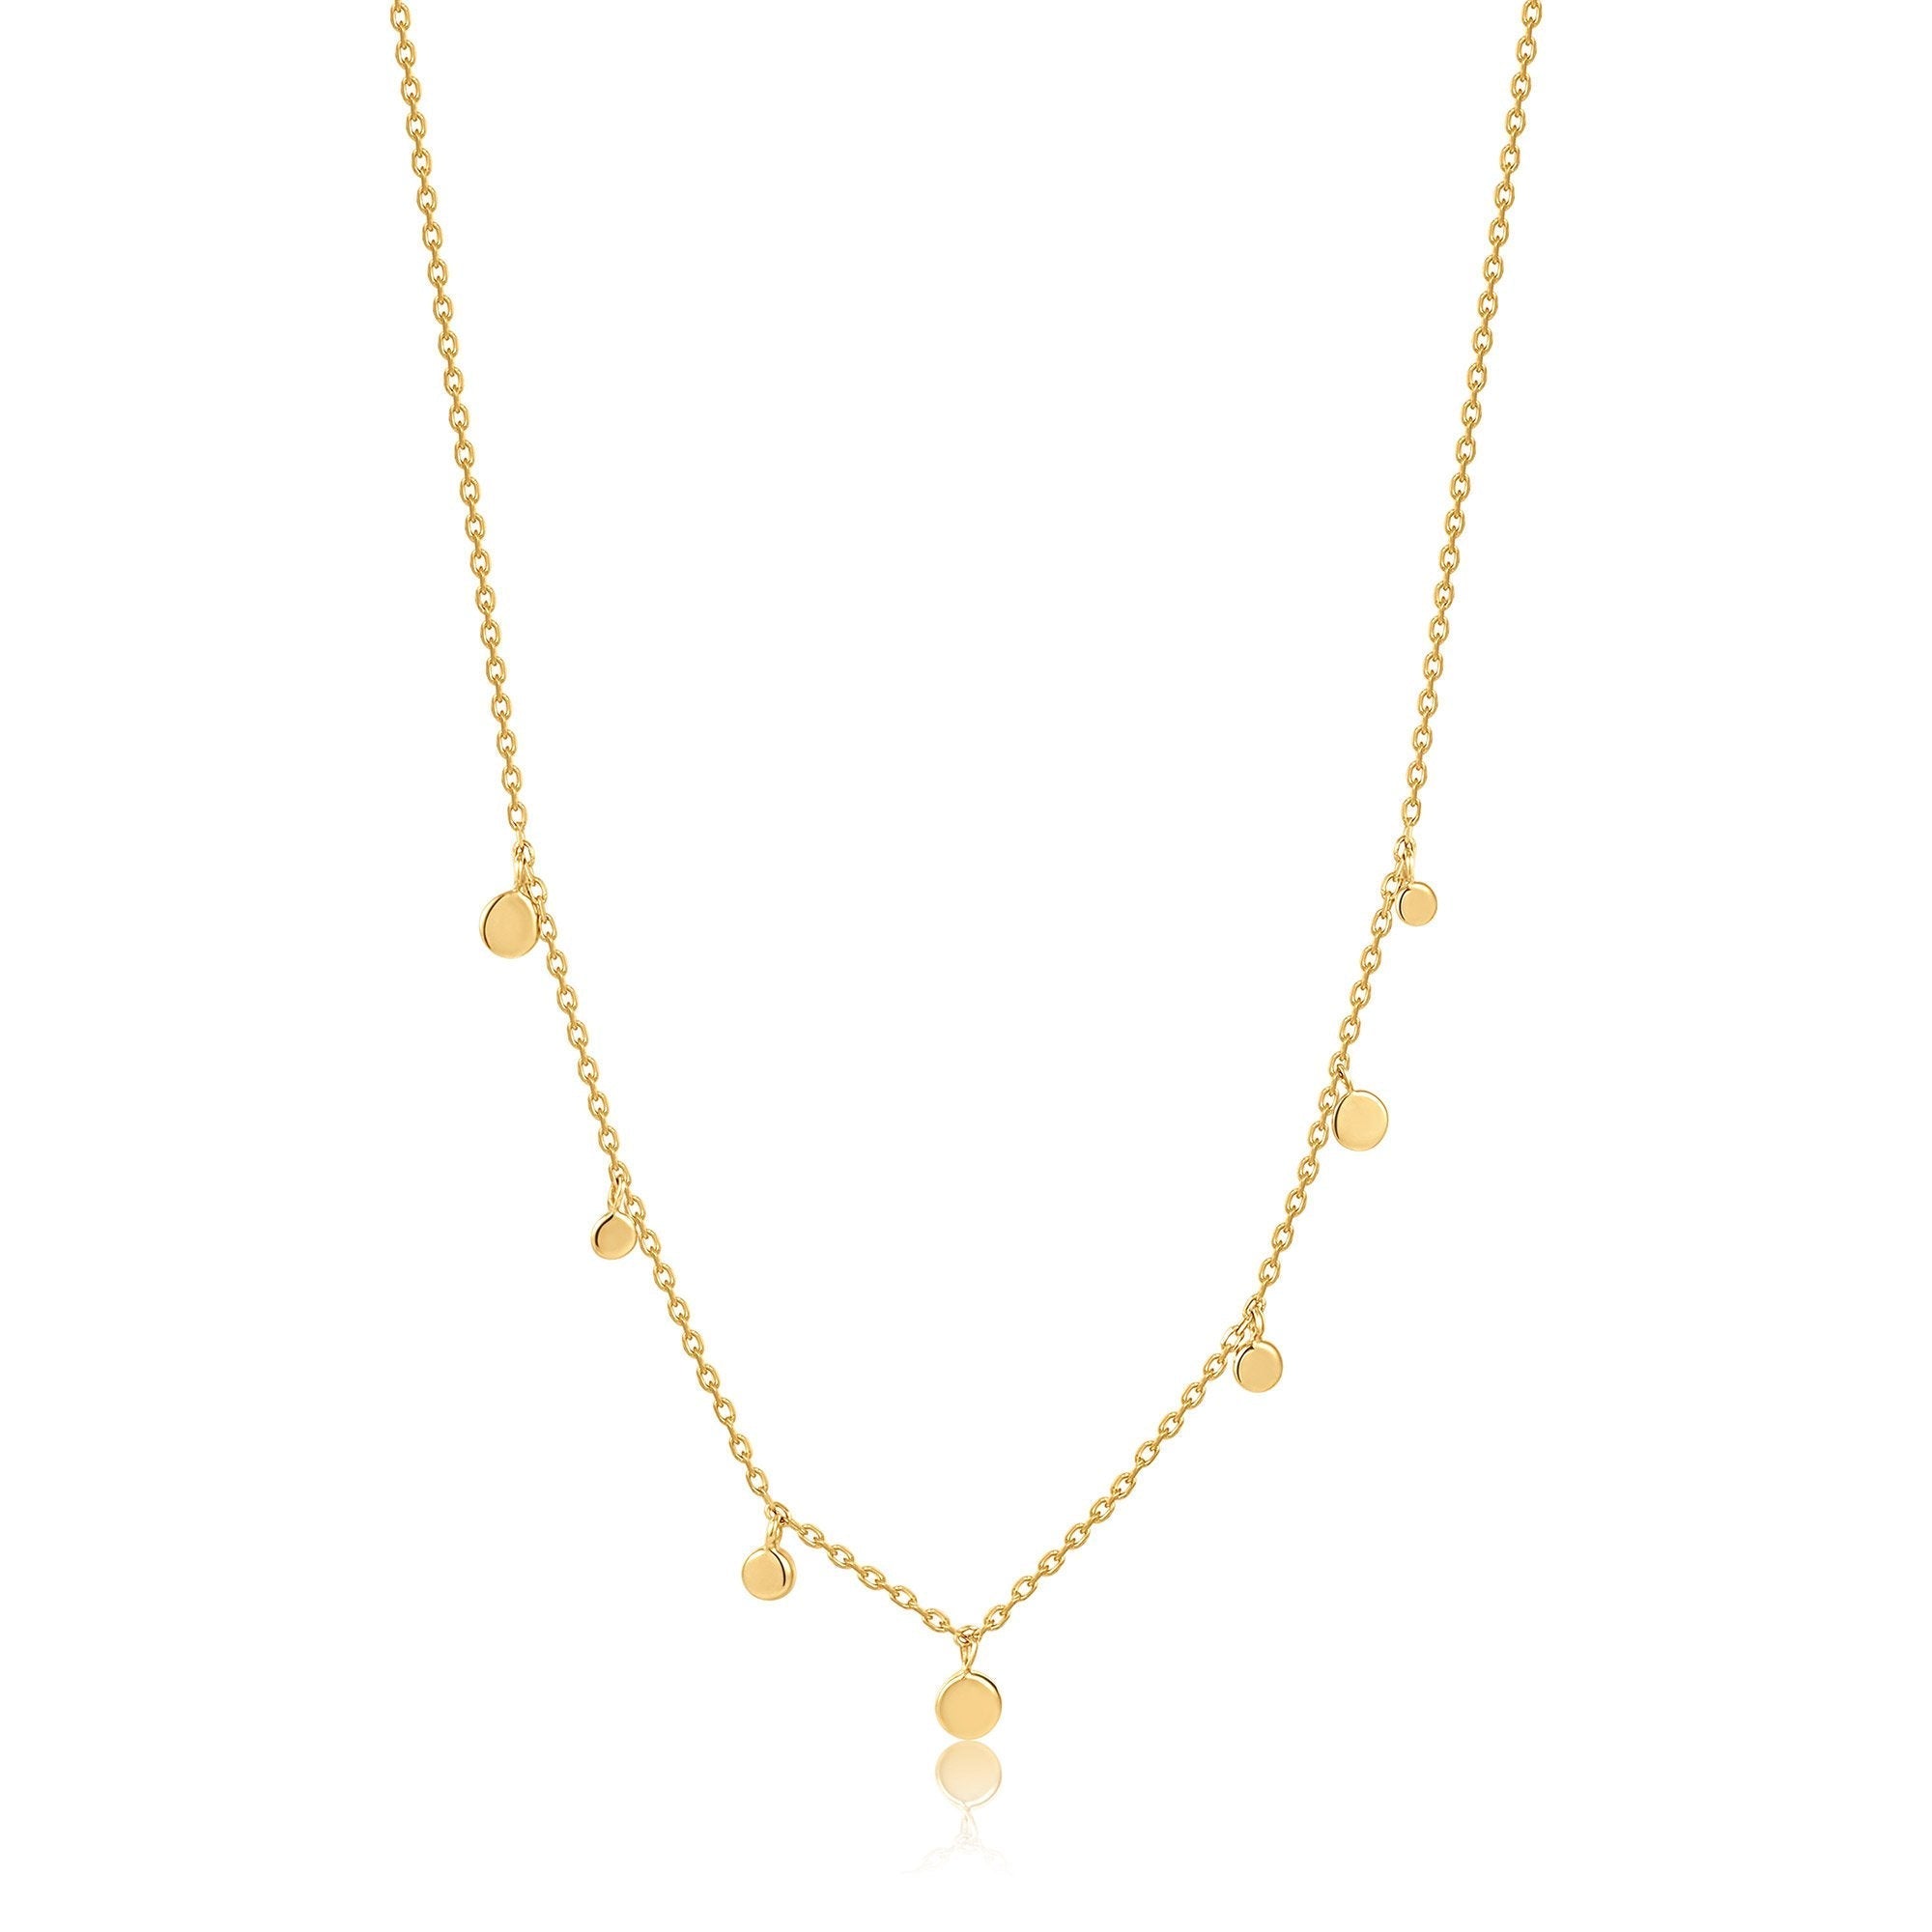 Ania Haie 14ct Gold Mixed Disc Necklace